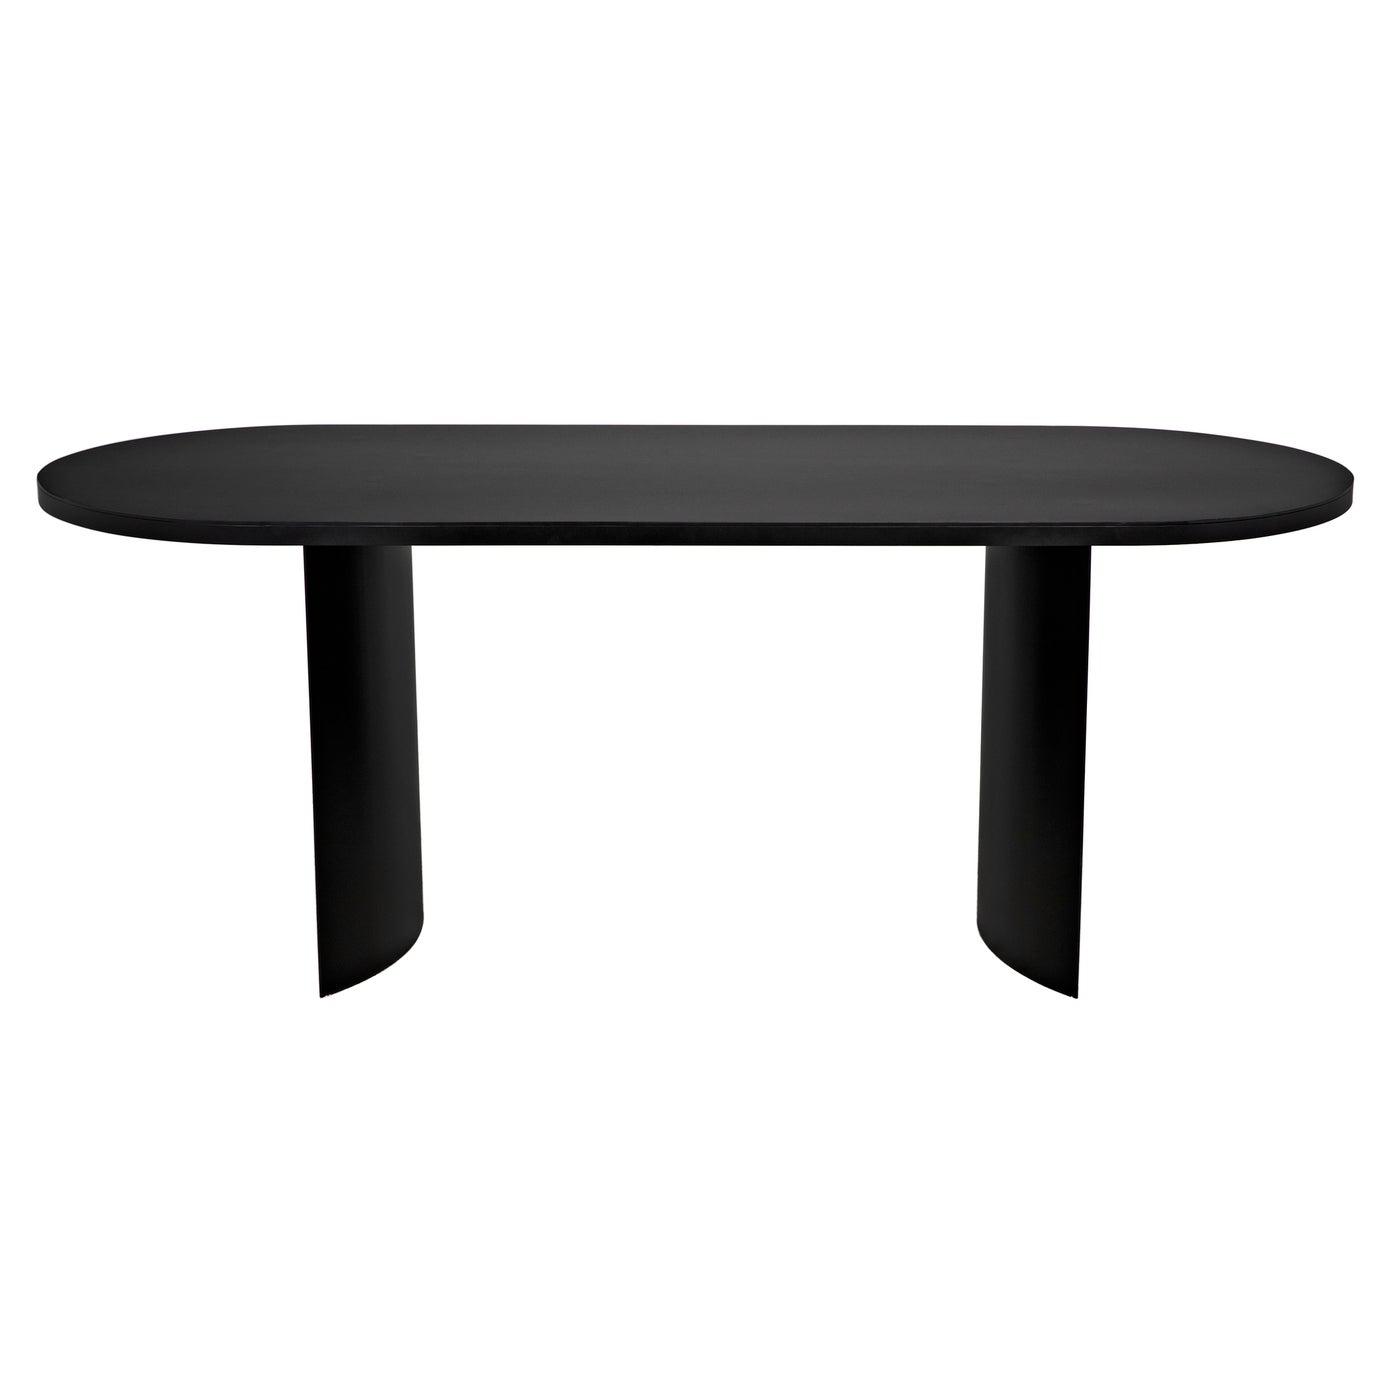 Concave Table